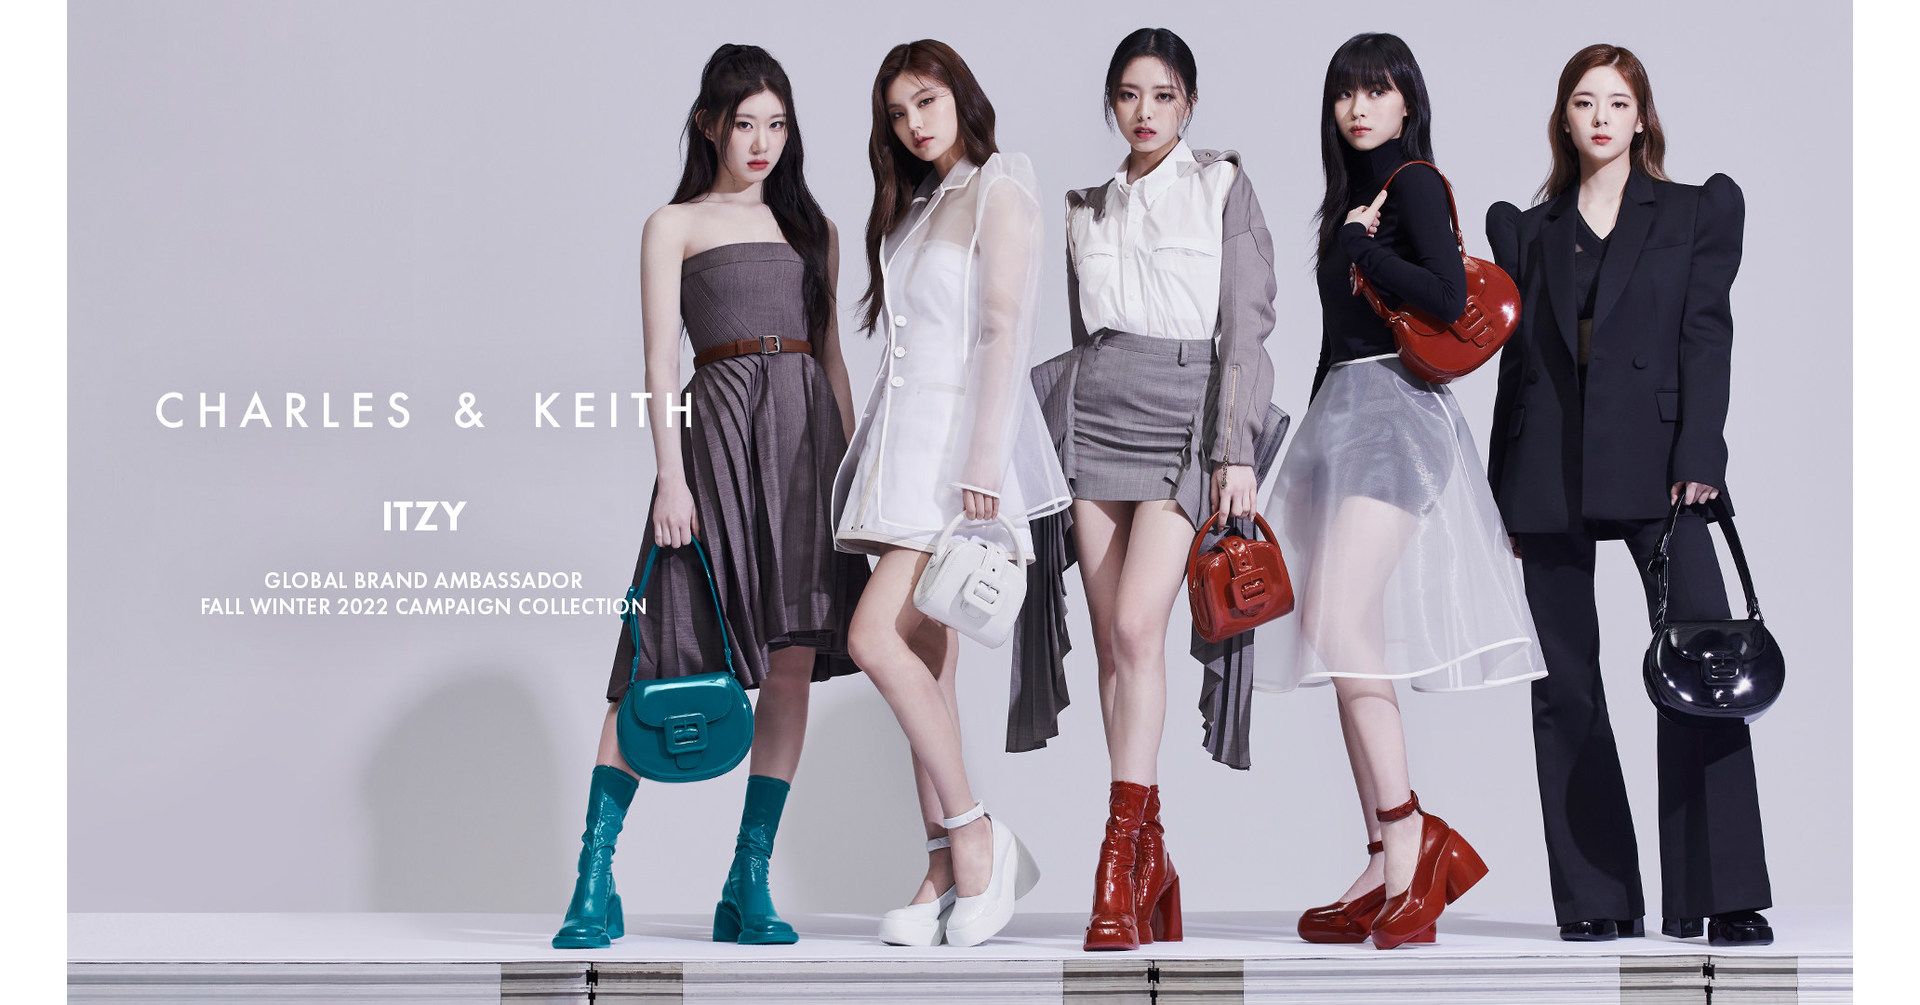 BRAND AUDIT-Charles&Keith. Brand story of Charles & Keith